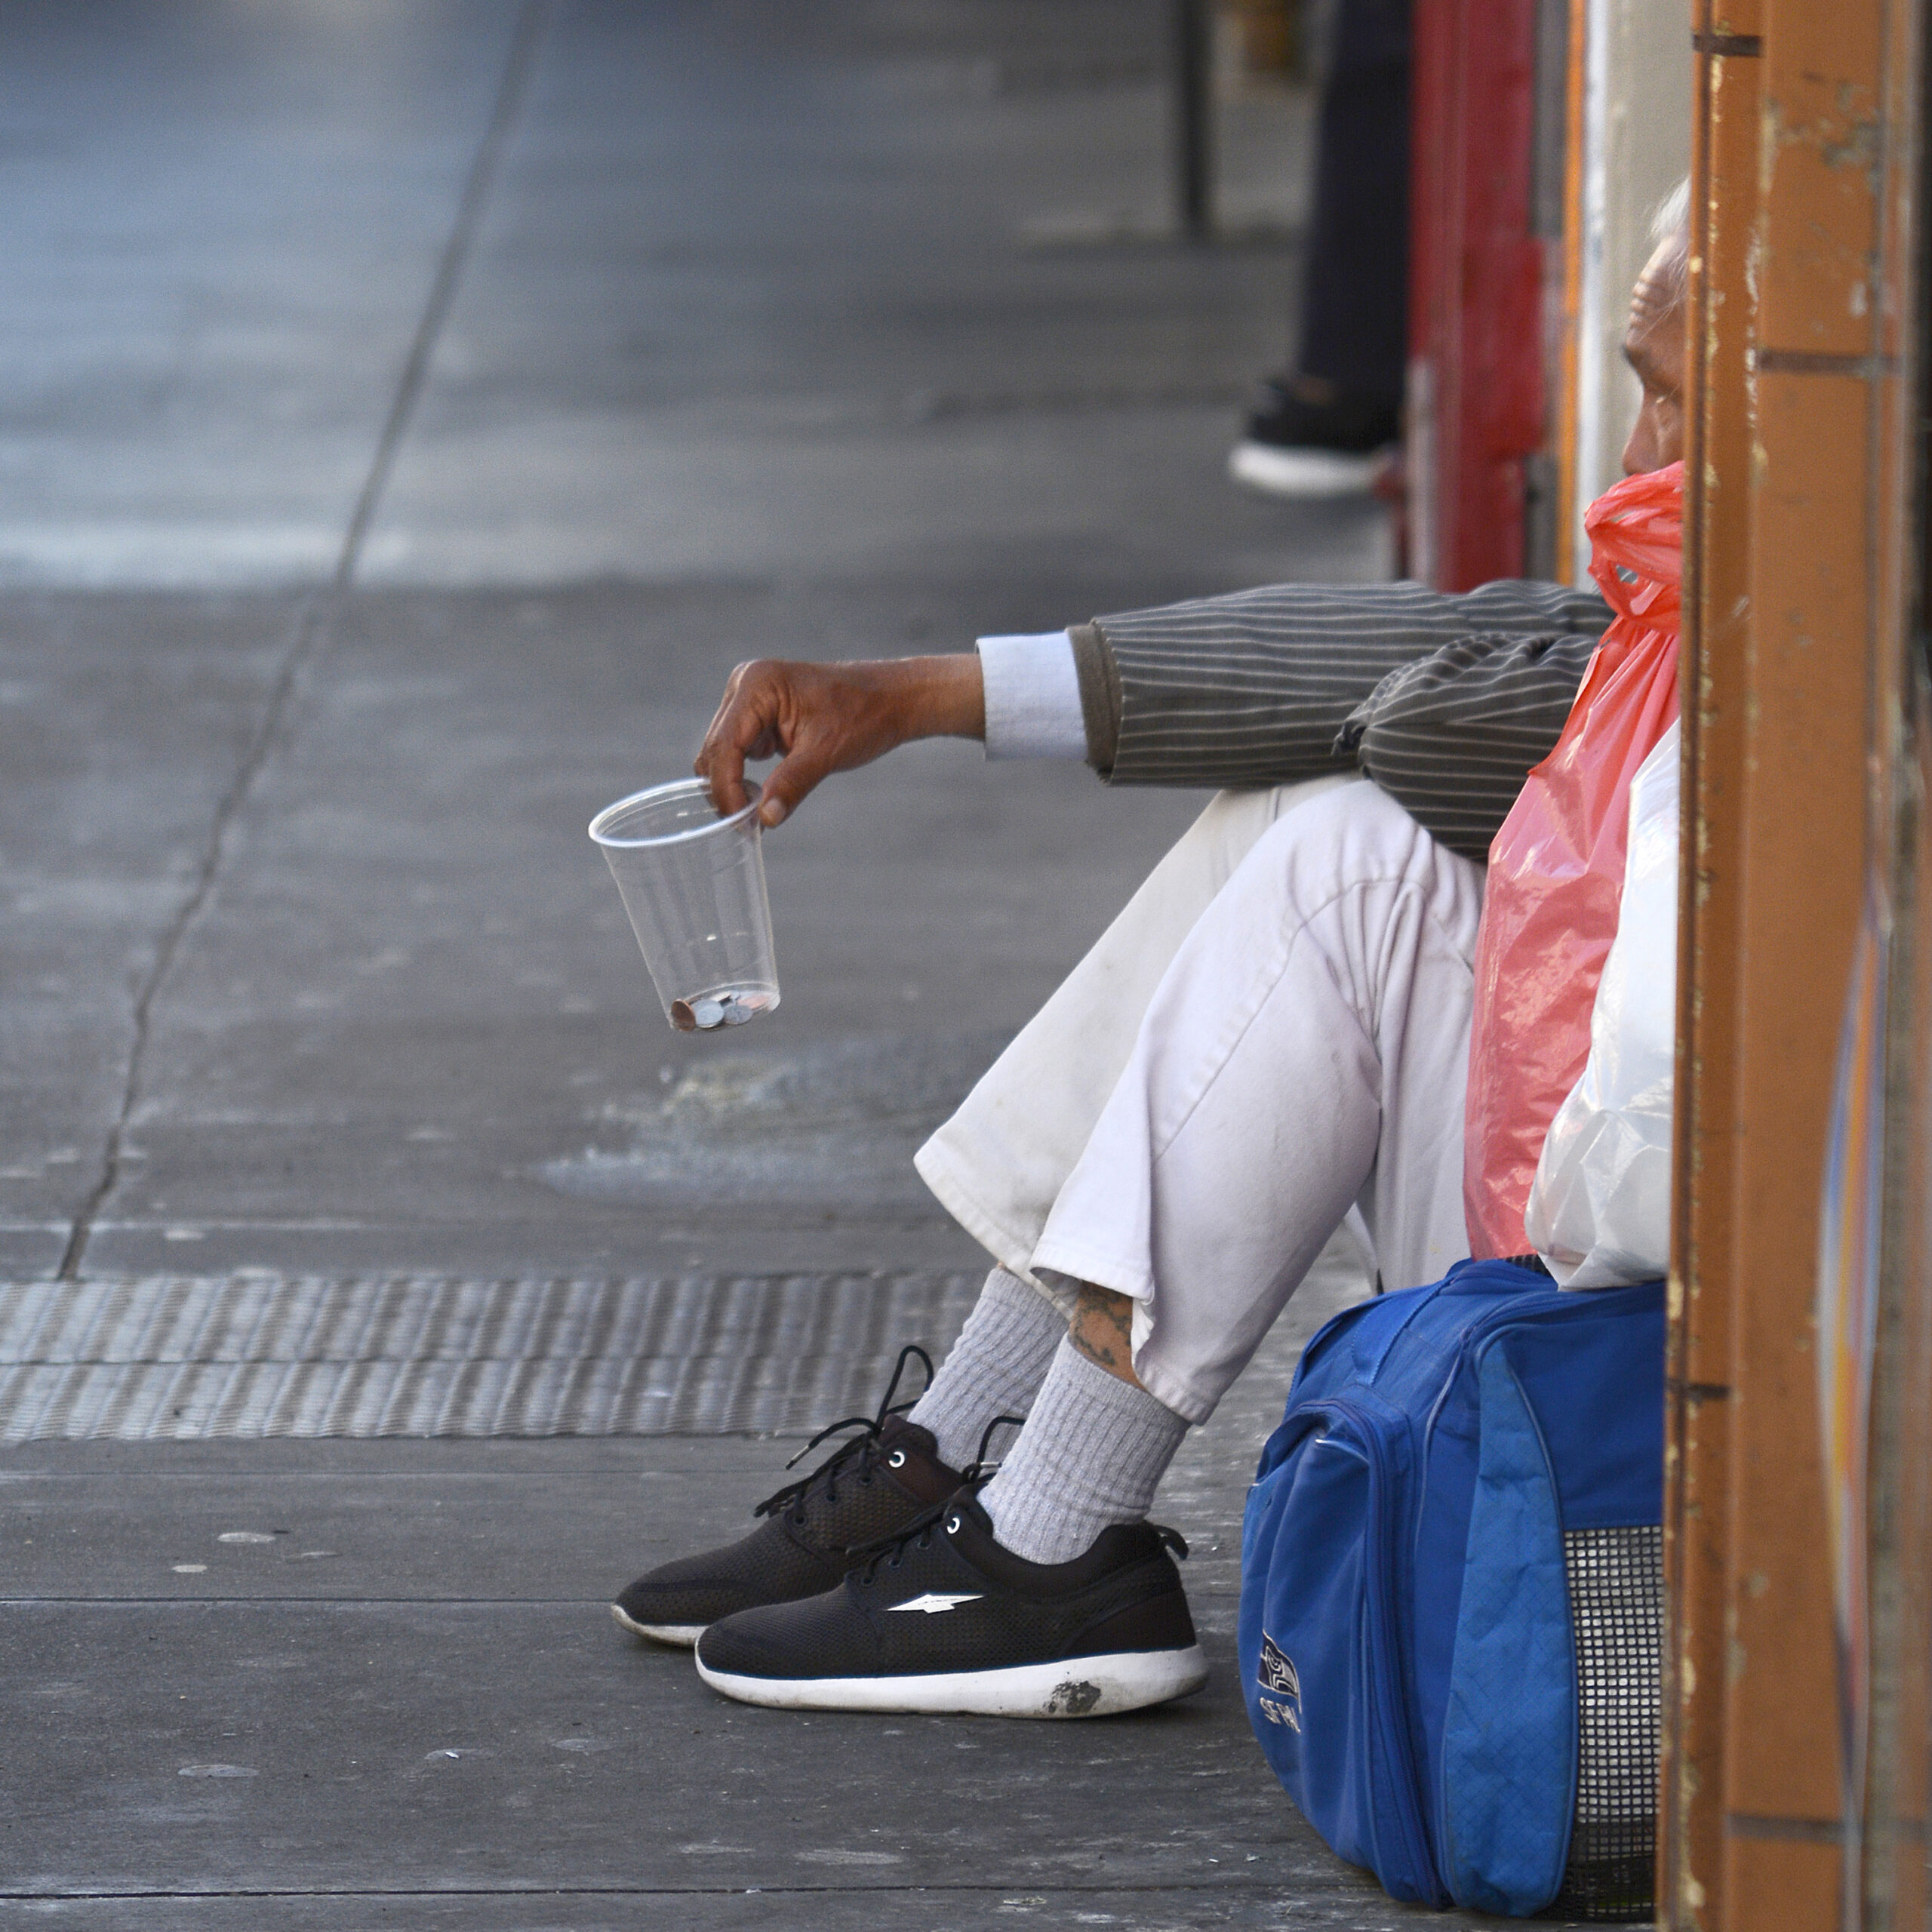 A person sitting on the sidewalk, holding out a cup with a few coins, beside a blue backpack.